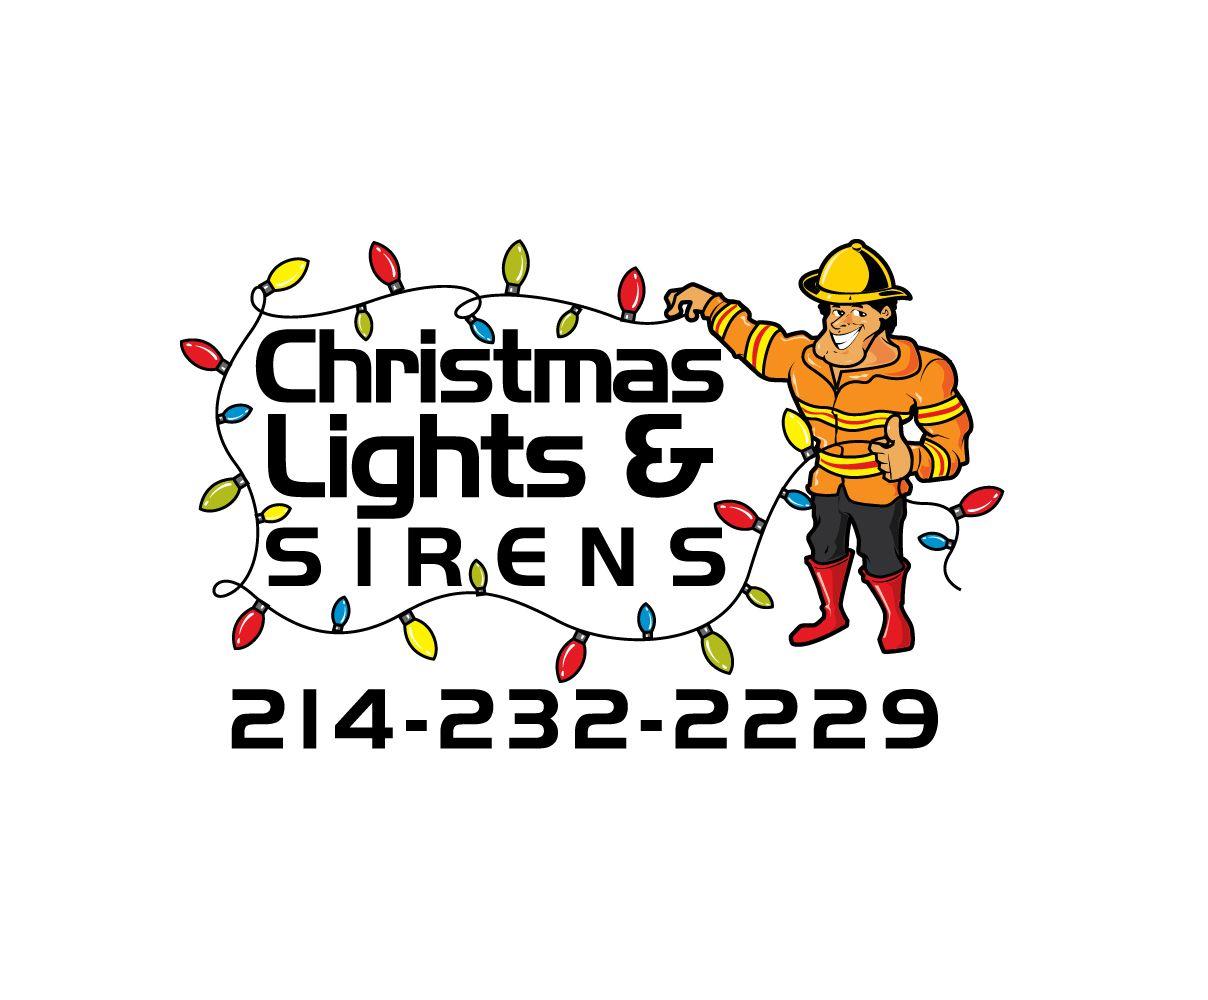 Christmas Lights Logo - 4 Logo Designs | Logo Design Project for a Business in United States